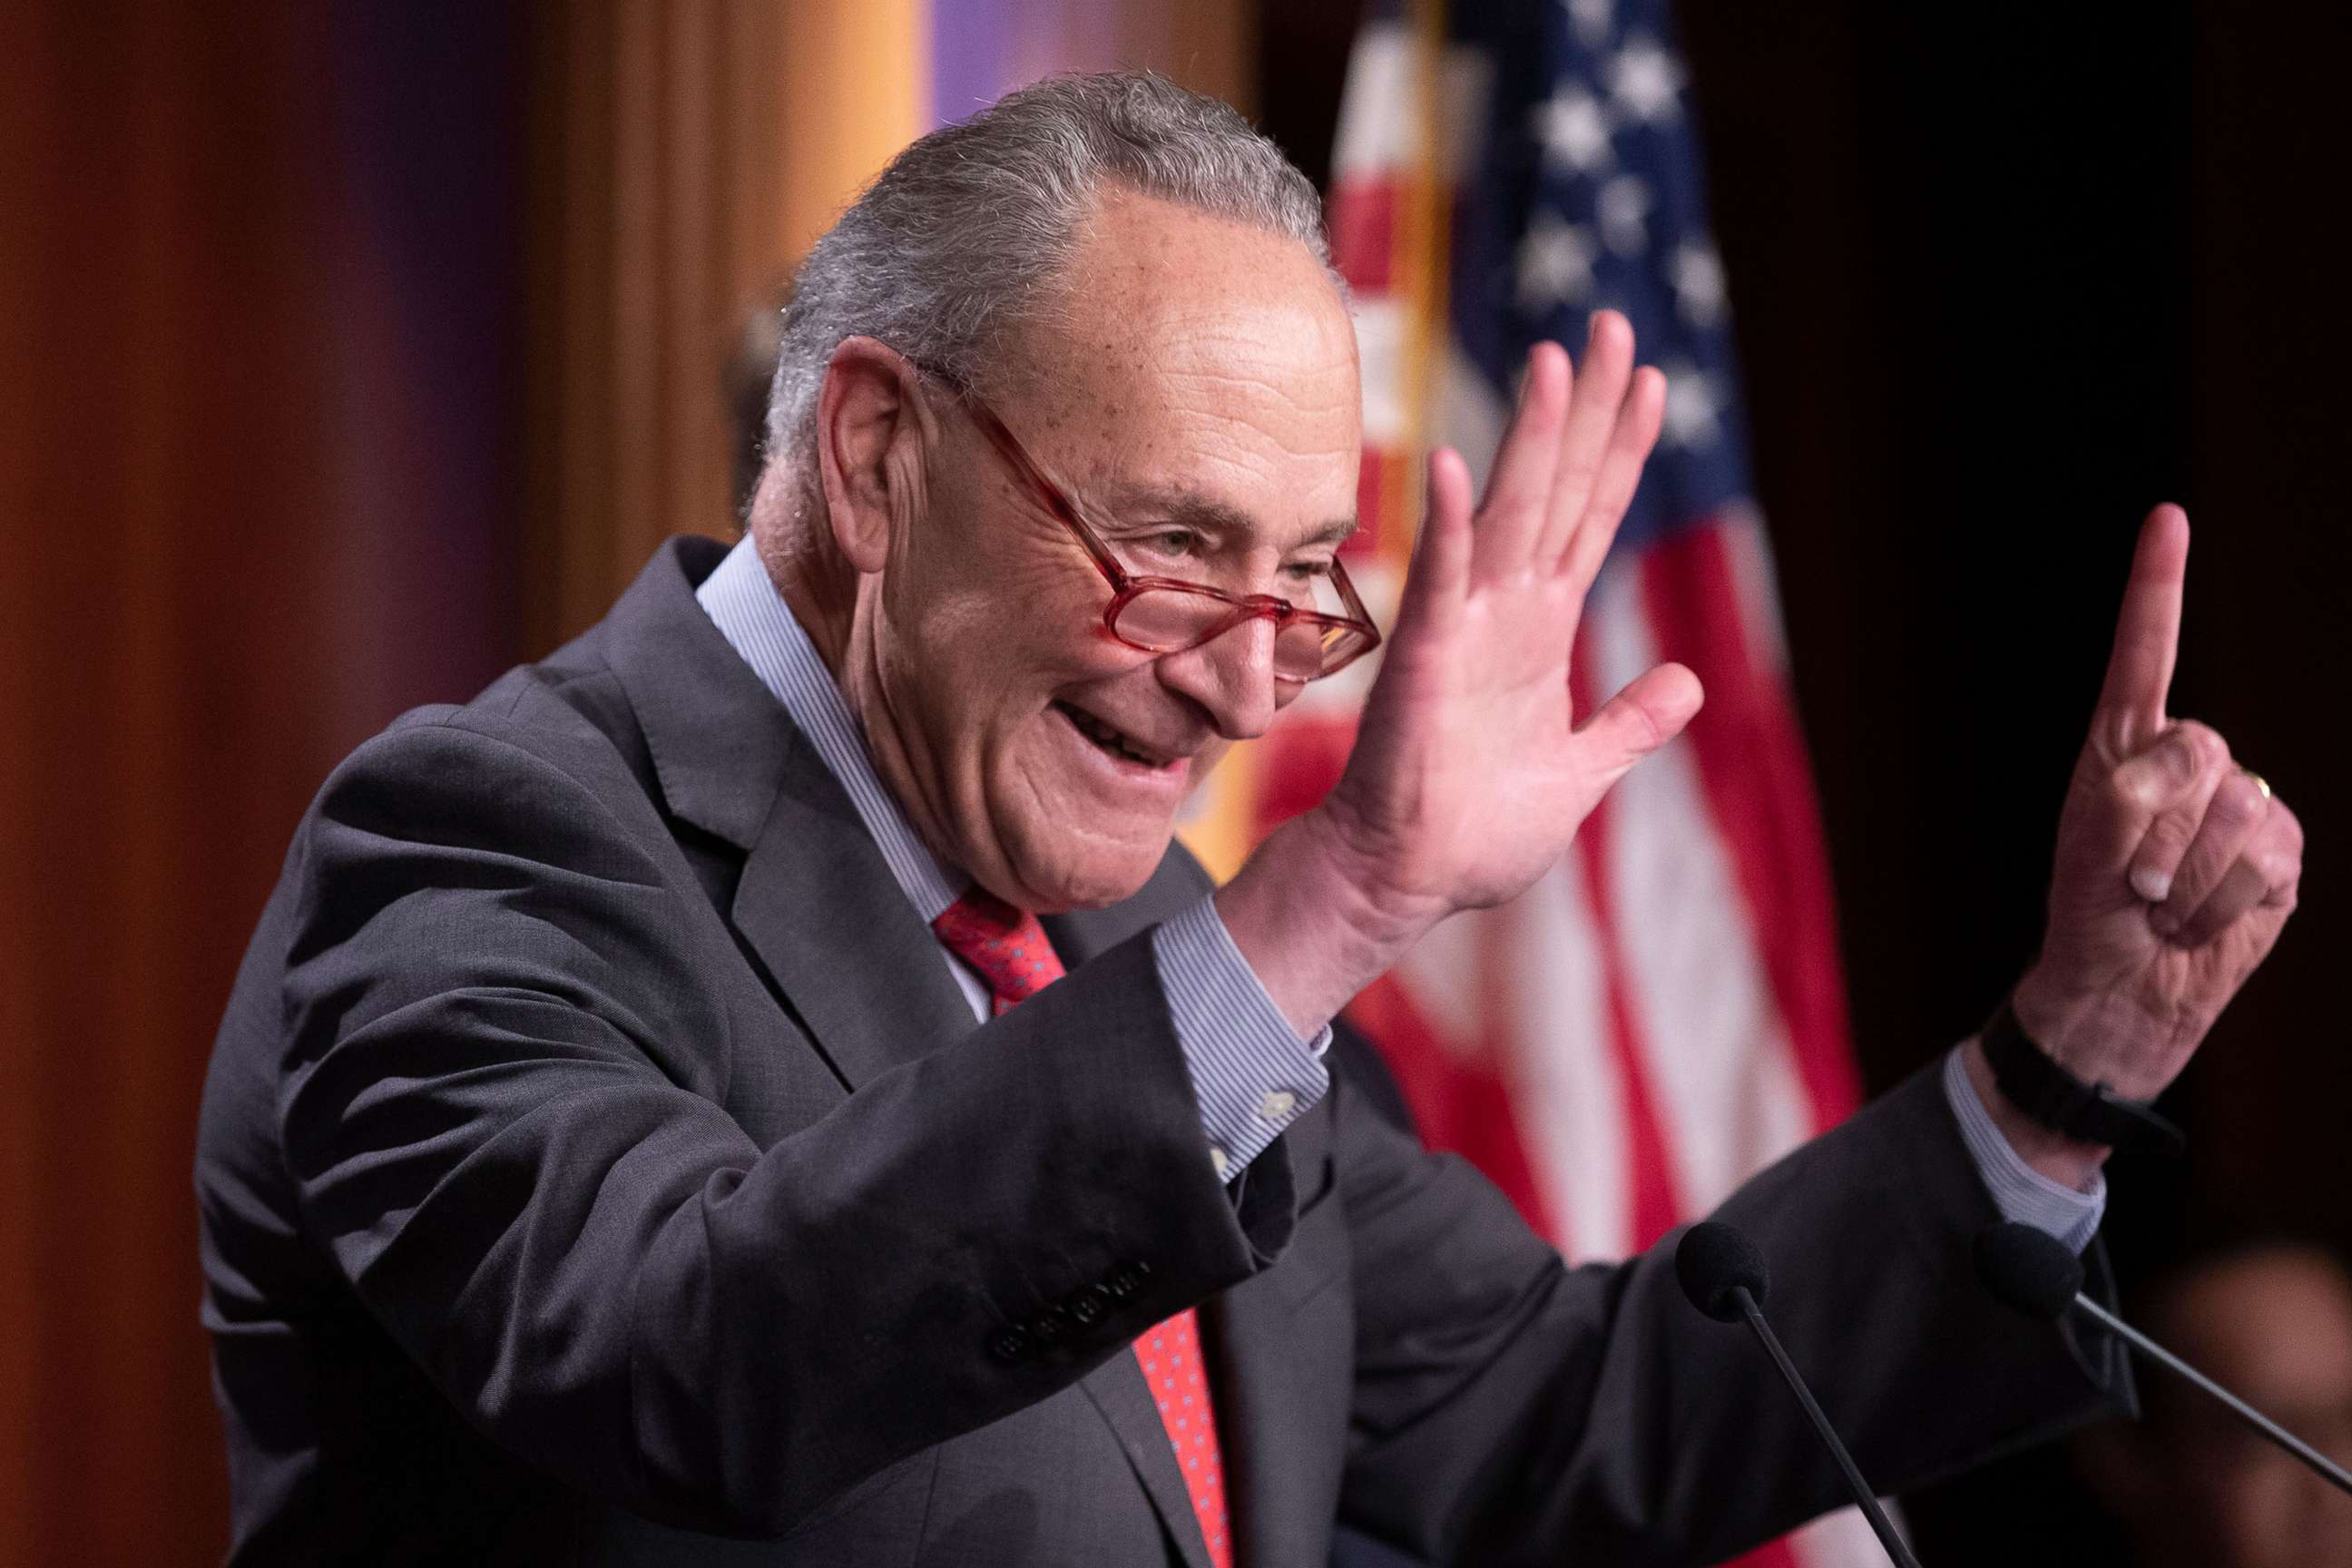 PHOTO: Chuck Schumer makes a gesture to represent the number 'fifty-one', during a news conference held to discuss the expansion of Democrats' majority in the Senate, on Capitol Hill in Washington D.C. Dec. 7, 2022.